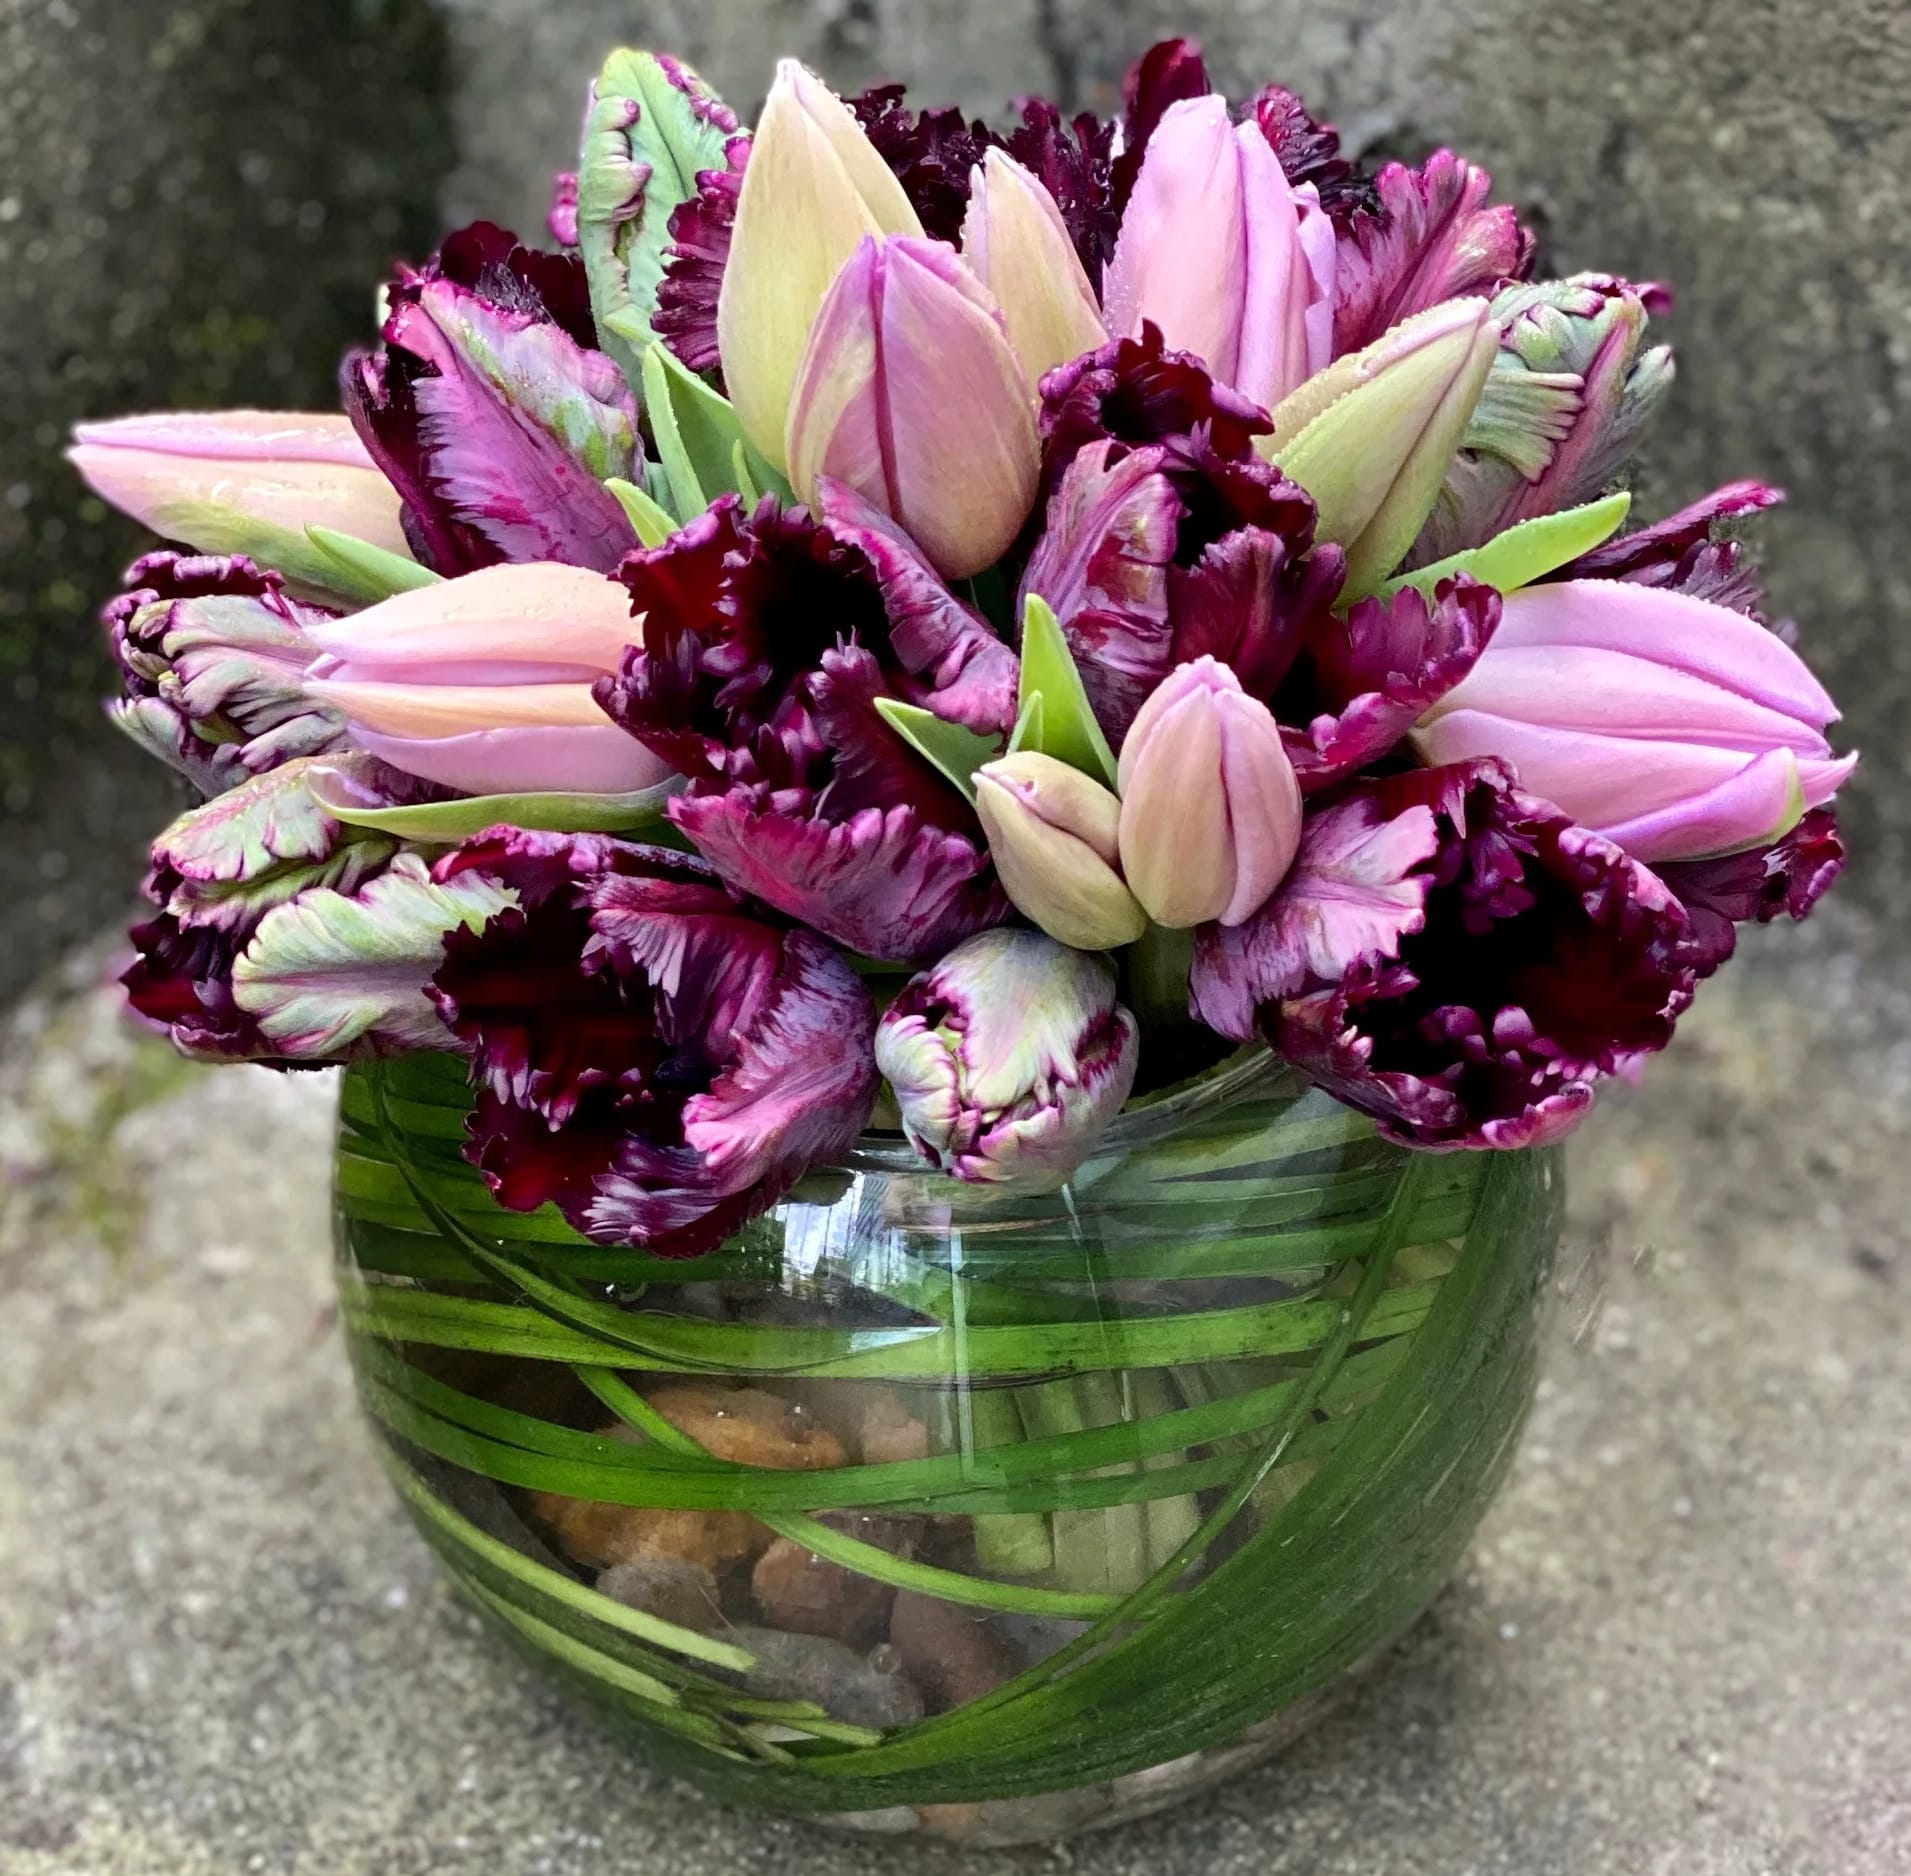 Tulip Bowl - A collection of beautiful, fancy tulips in a bubble bowl that is lined with bear grass and a layer of pebbles. We feature gorgeous fancy tulips with a preference for variegated, parrot, or double varieties. The Deluxe version has even more tulips in a larger bubble bowl.  Tulip varieties and colors that we have on hand will vary through the season. Some varieties bloom early and some bloom later, or we may find varieties in the local flower market that inspire us. If you would like a particular color, please let us know under 'Special Instructions' during checkout.   Approximate size - Standard:  5 inches wide by 6 inches tall Deluxe: 6.5 inches wide by 7 inches tall 